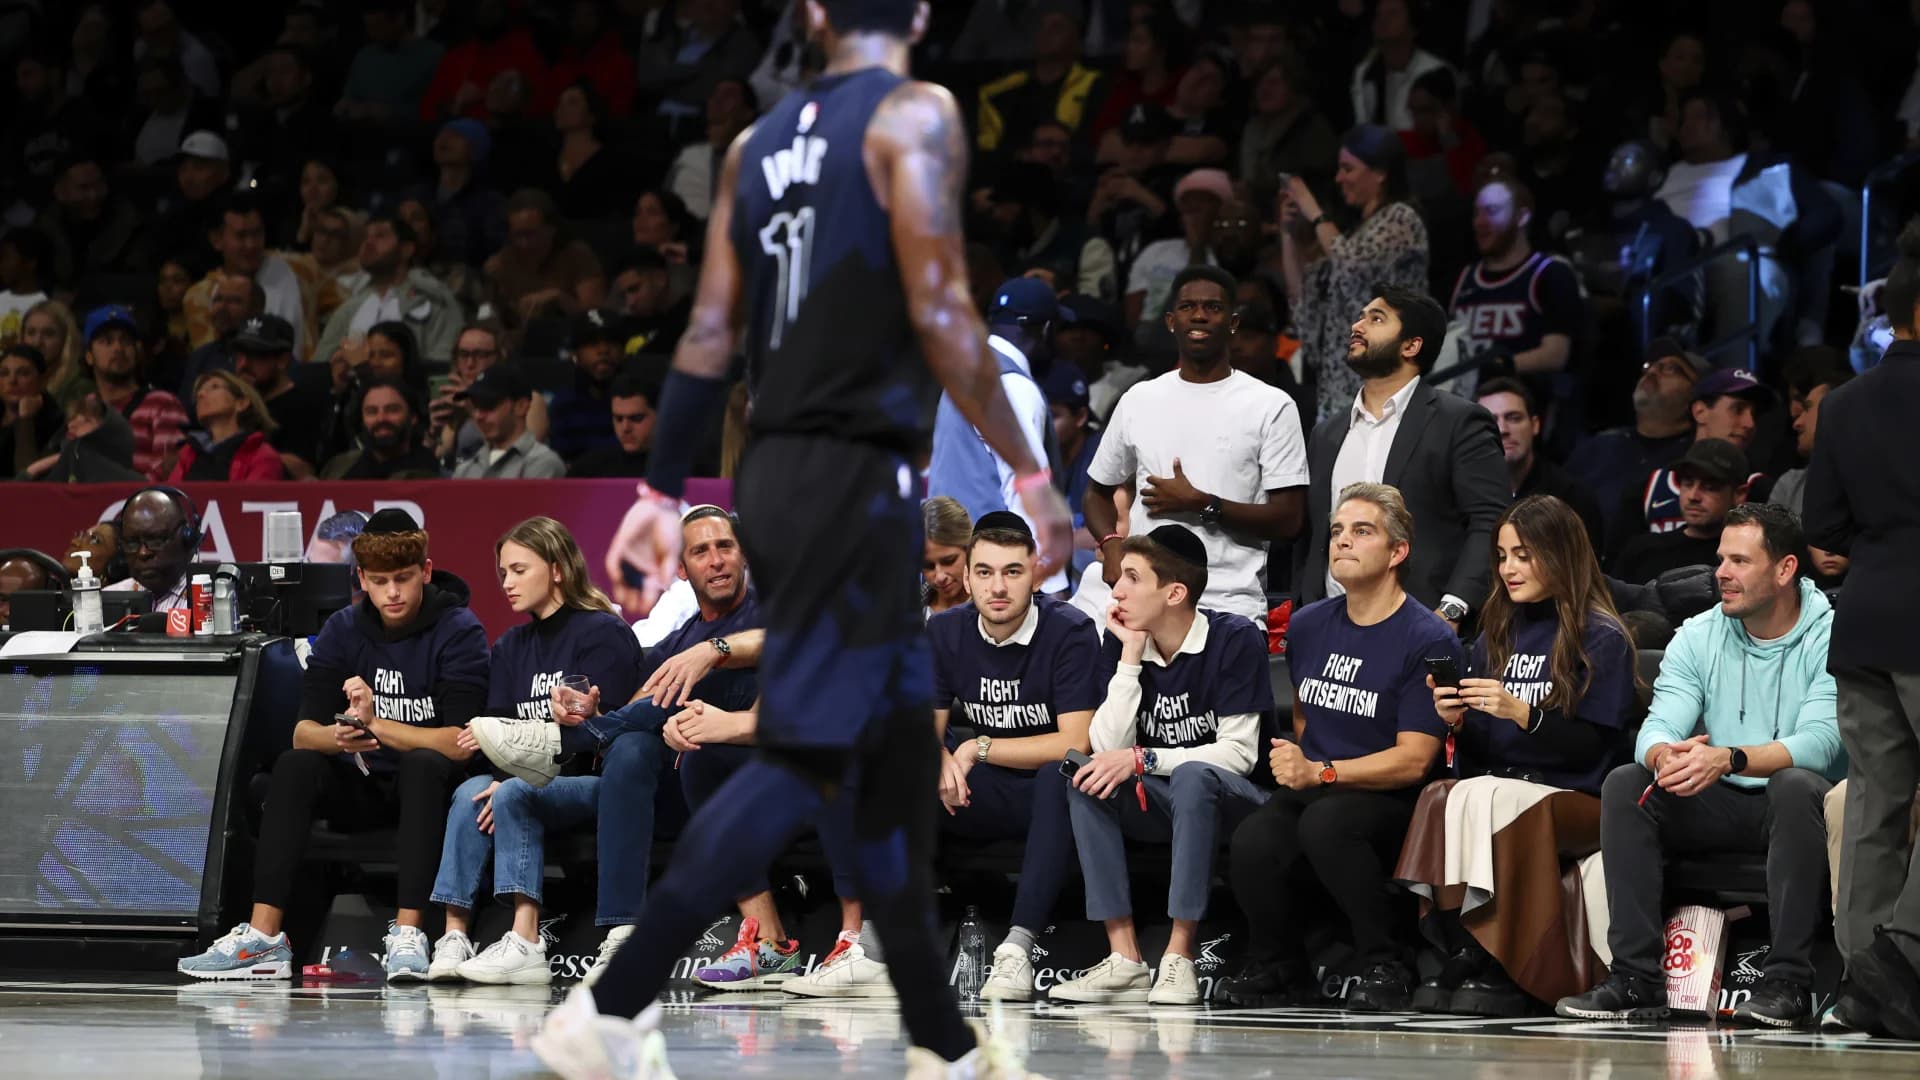 Fans in 'Fight Antisemitism' shirts courtside at Nets game